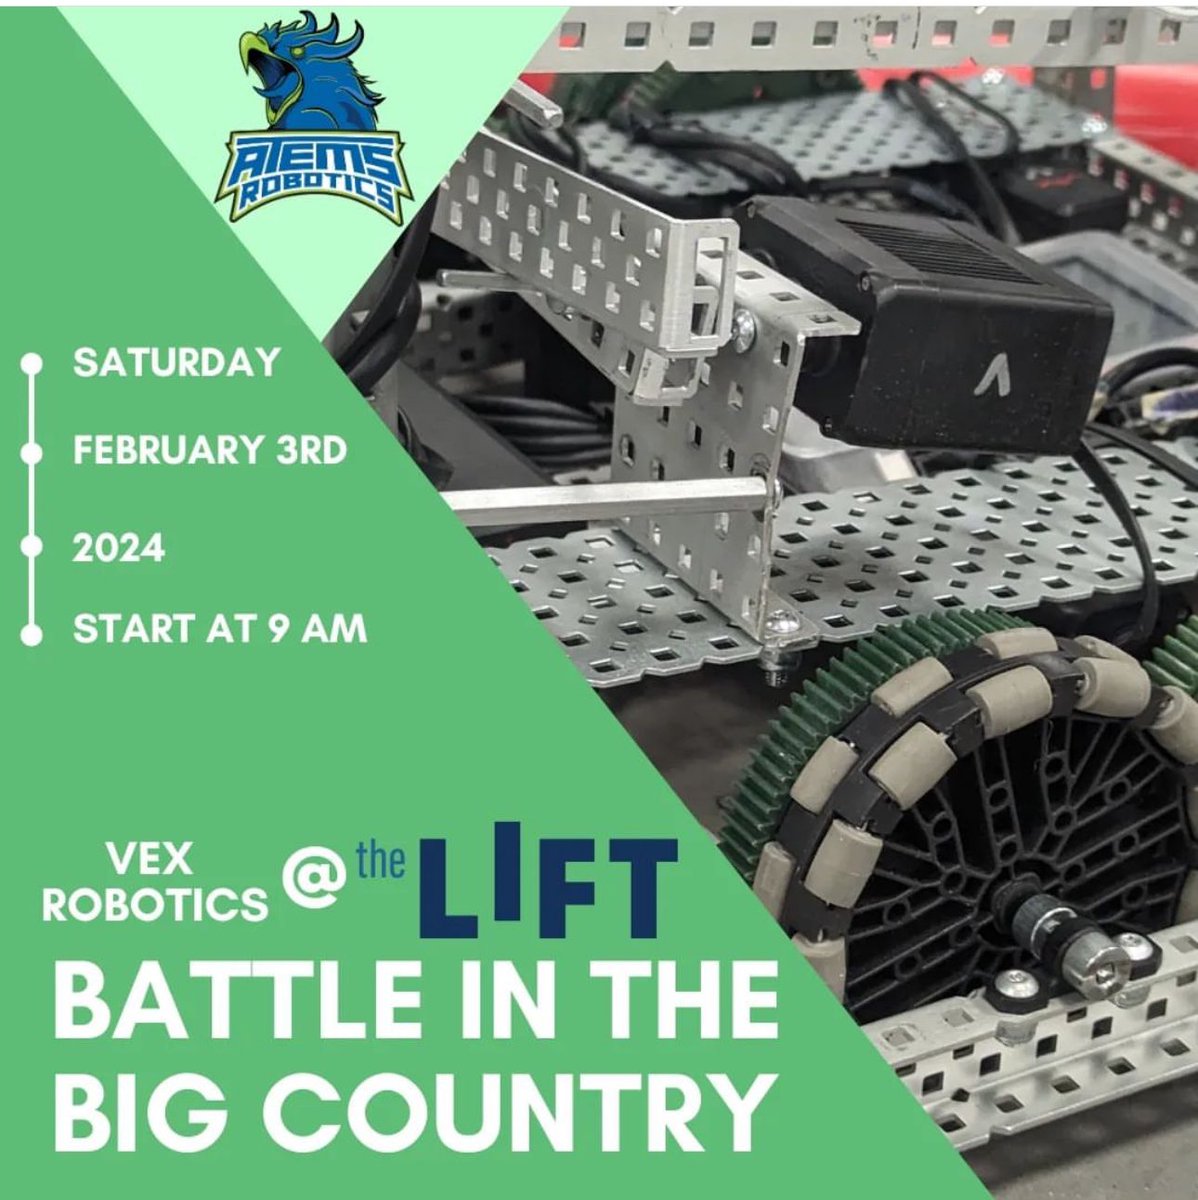 Come on out tomorrow to the LIFT to watch the Vex Robotics Battle in the Big Country! 35 teams from the west and north central parts of Texas will compete for an invitation to the Region 5 Texas state championship at the LIFT on Feb. 24th. Competition starts at 10:00am!